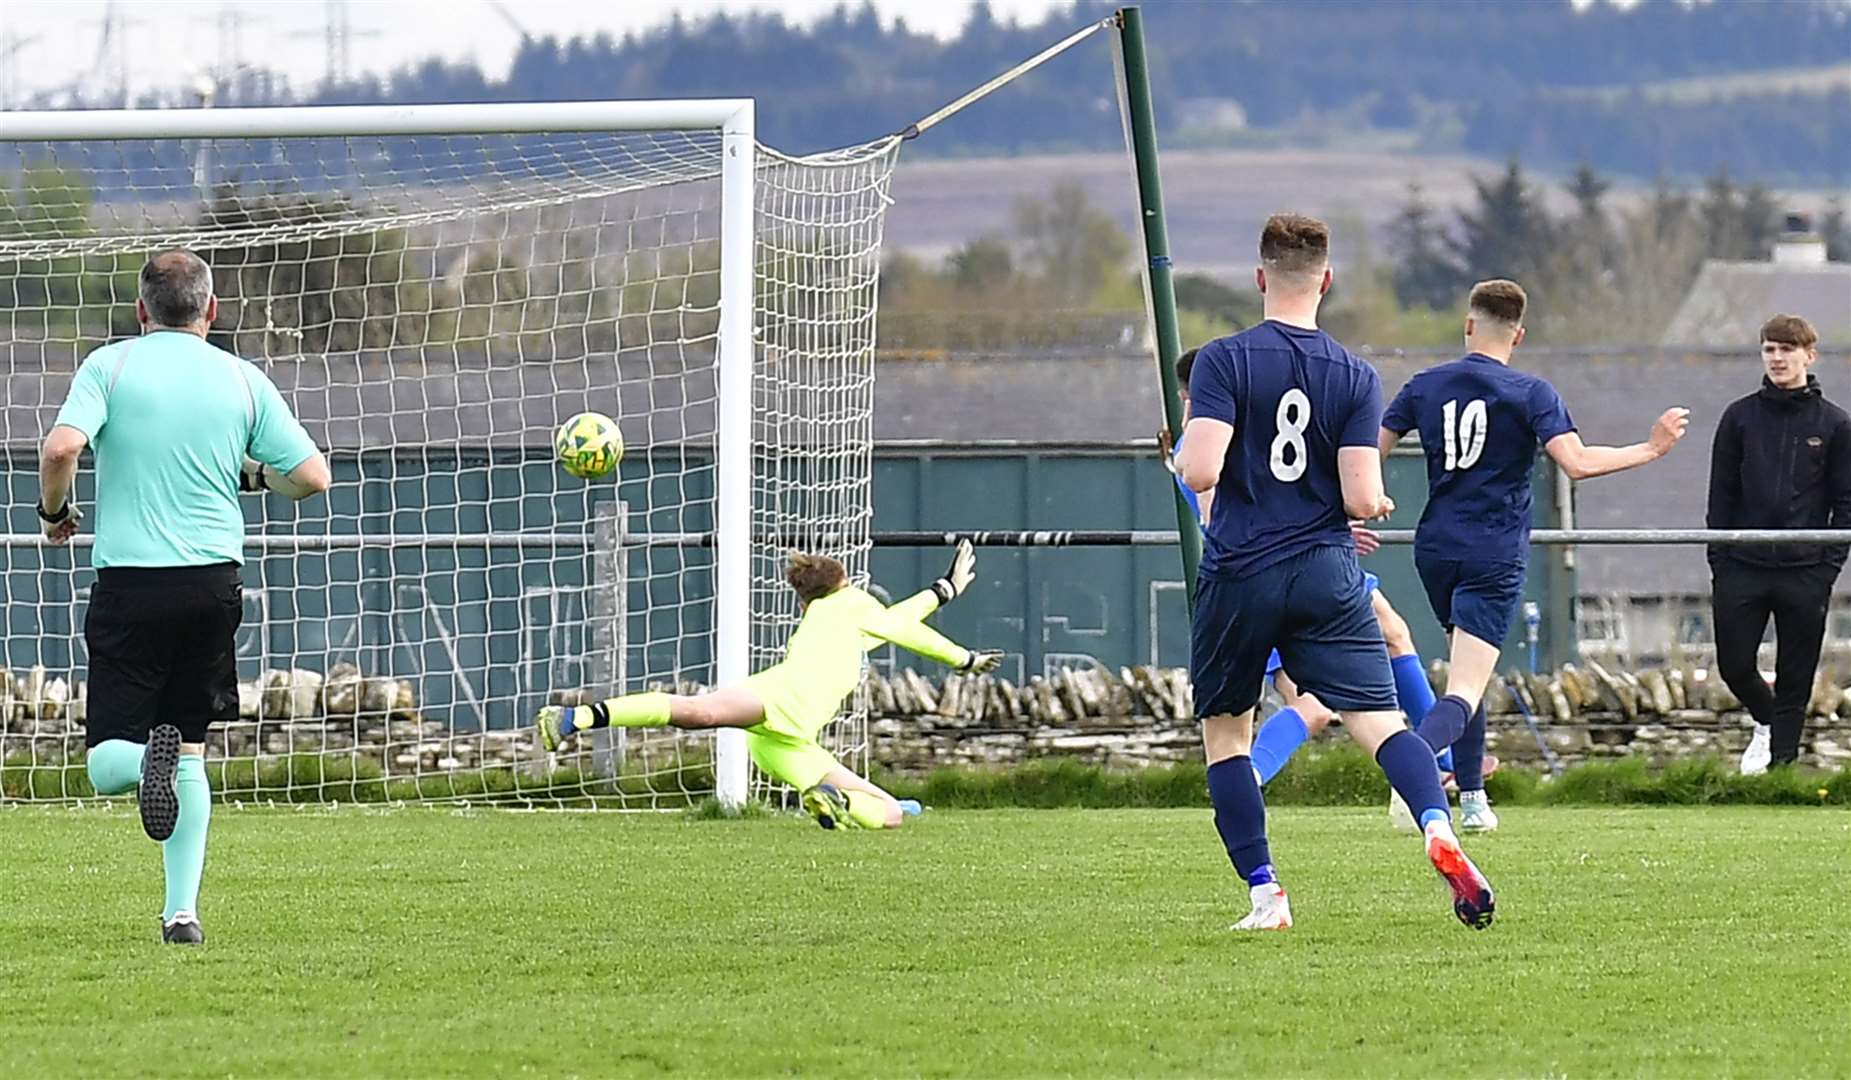 James Mackintosh (number 10) fires the ball past Acks keeper Mackenzie Beaton to put High Ormlie Hotspur 2-1 up at Morrison Park. Picture: Bob Roger